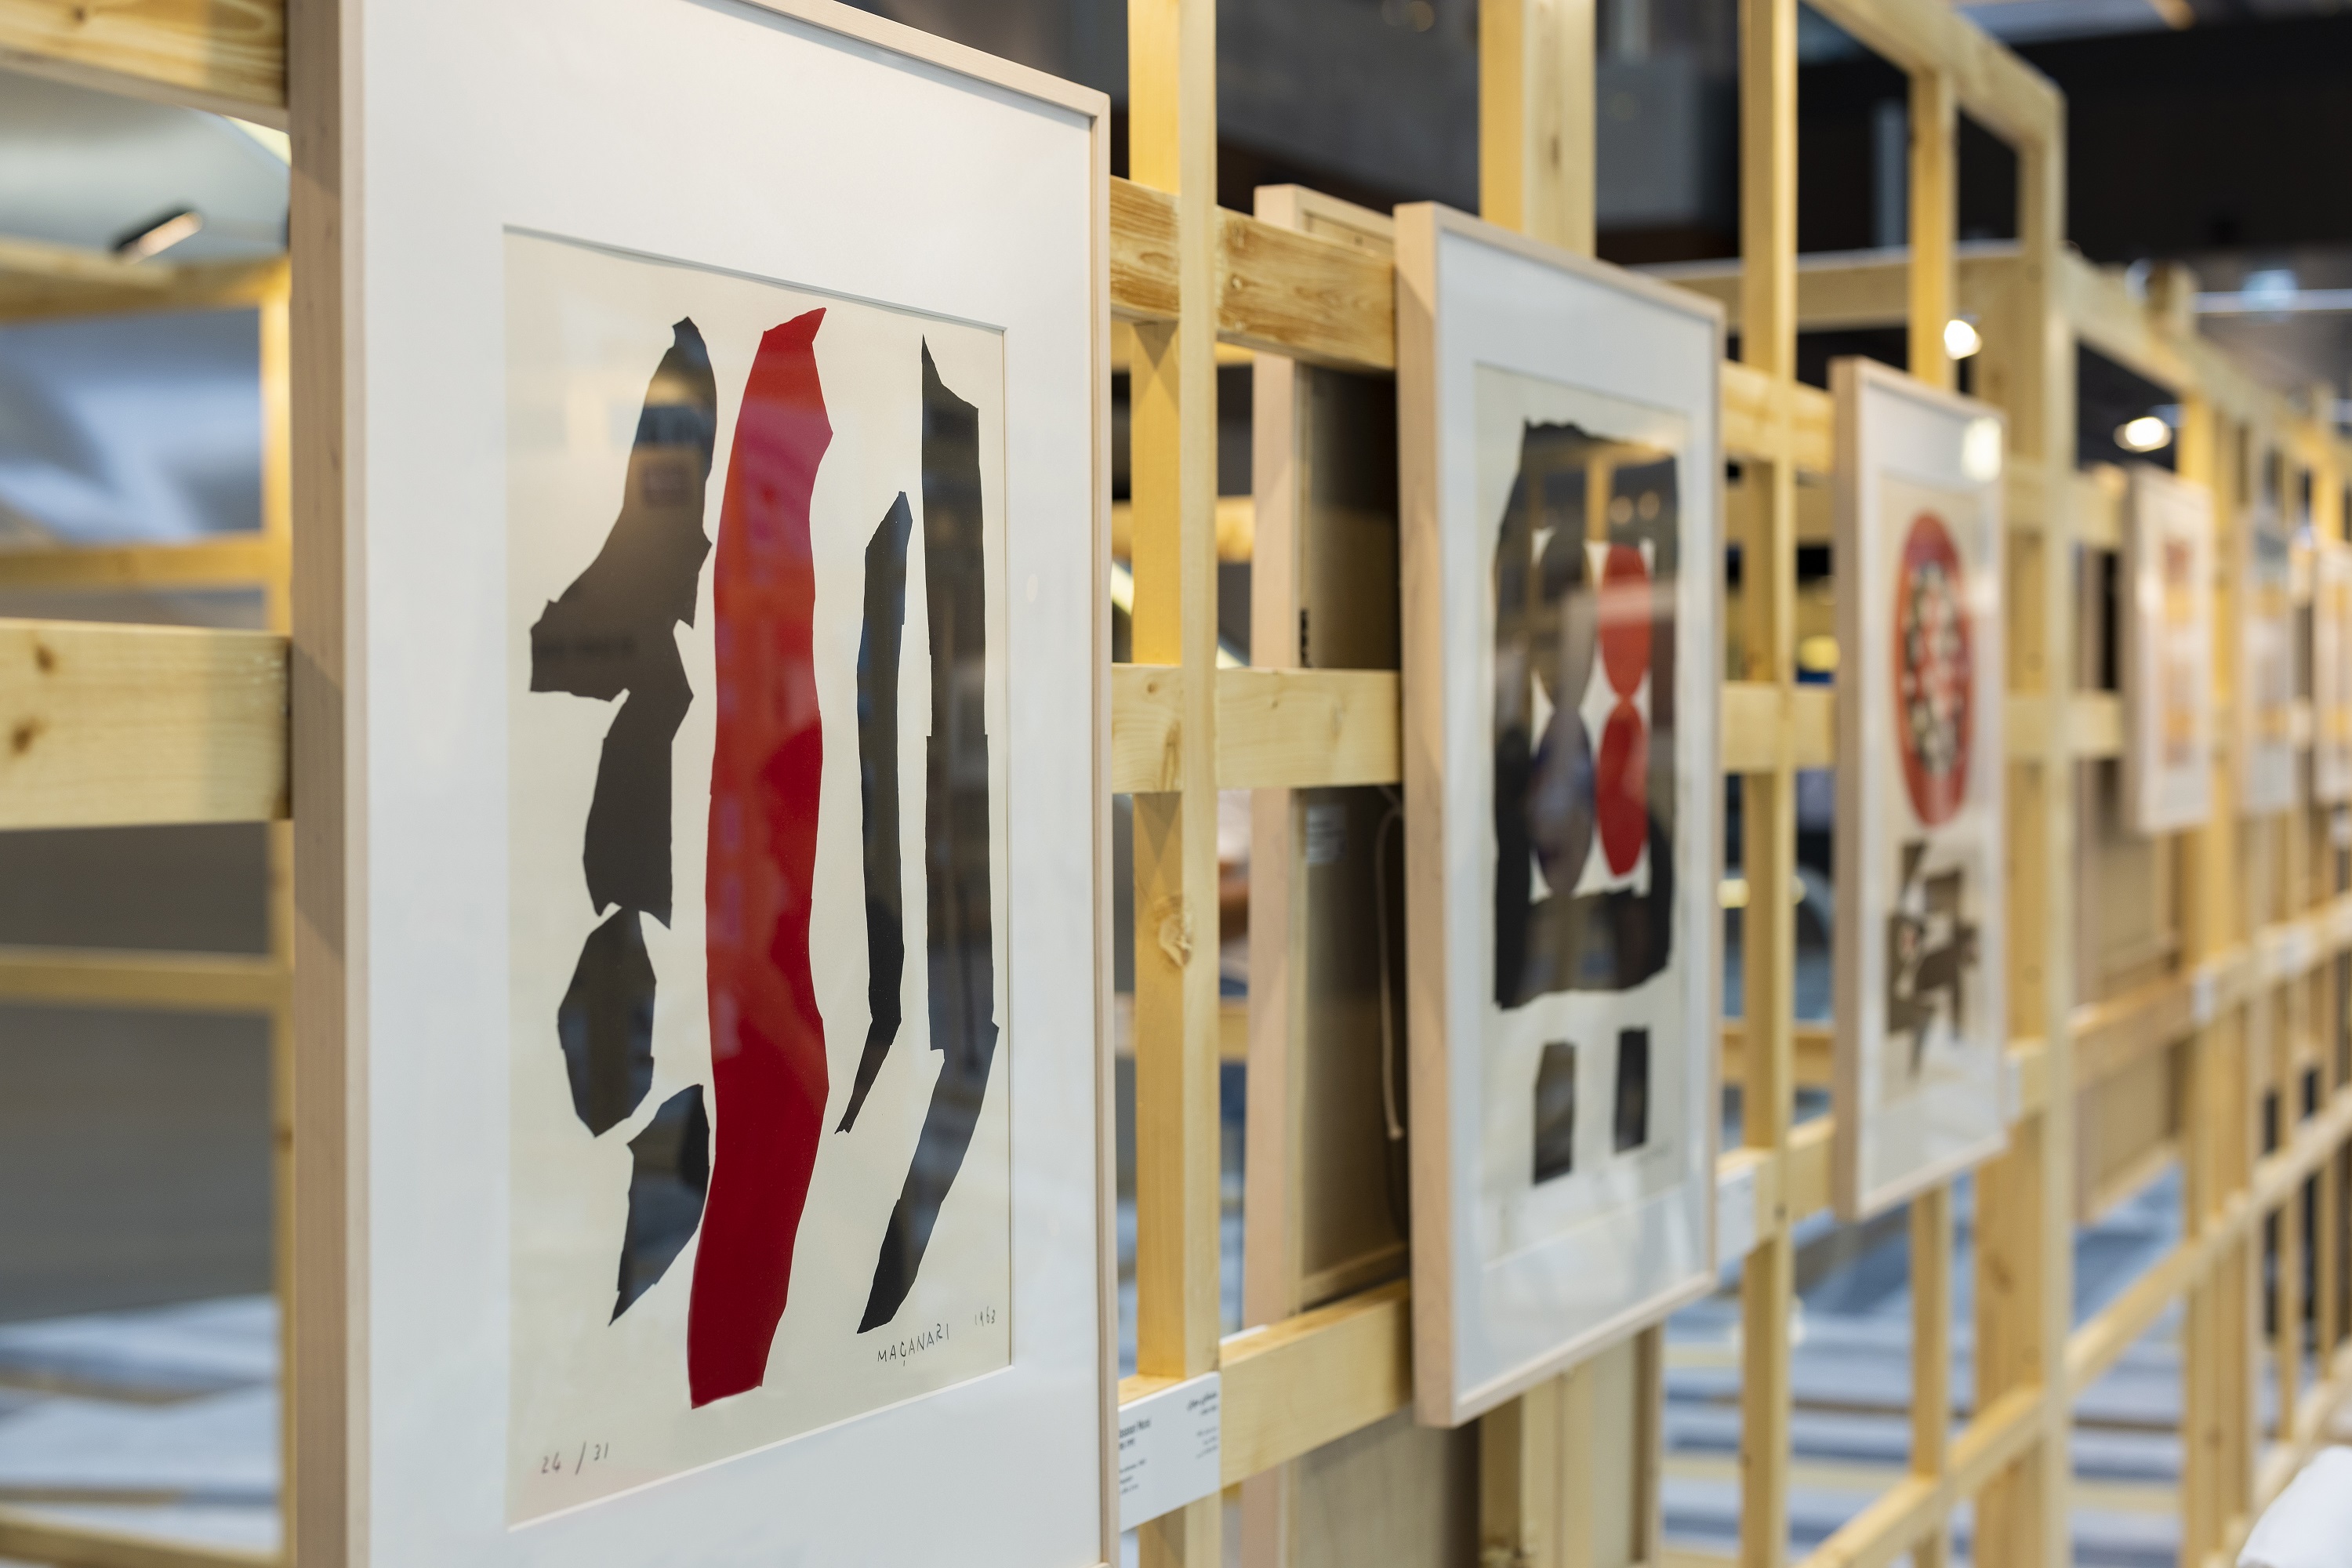 ‘Variation And Autonomy: The Prints Of Contemporary Japanese Painters’ Comes To Abu Dhabi As Part Of Abu Dhabi Festival